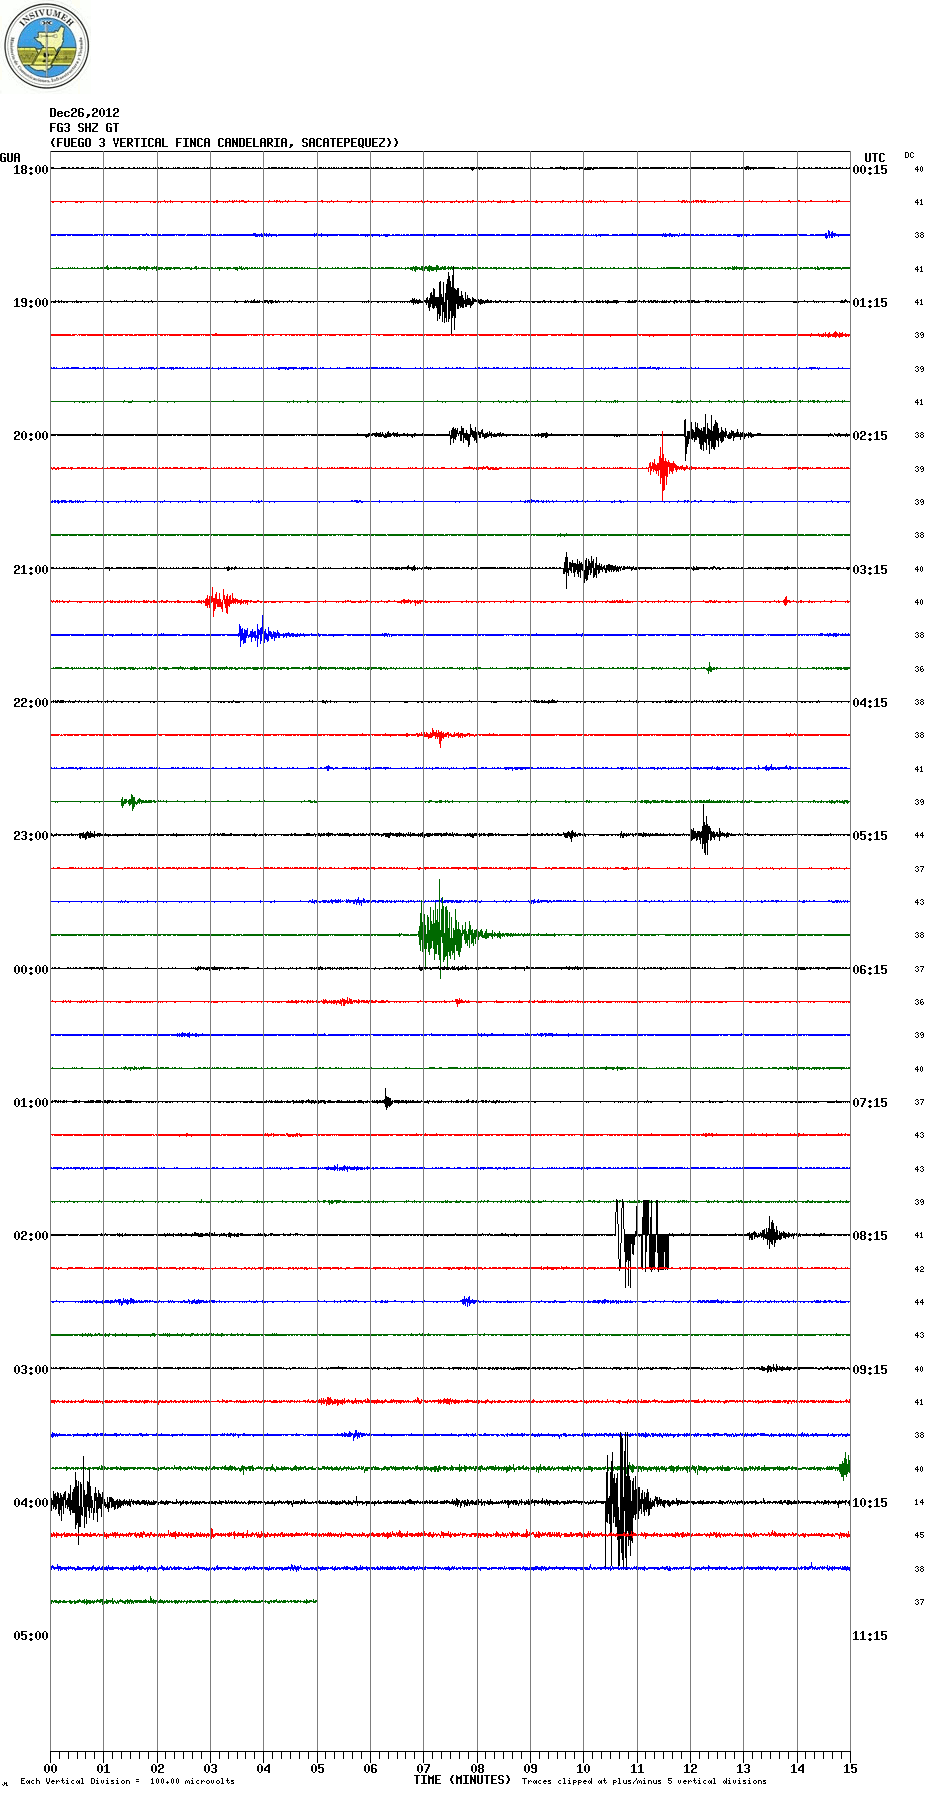 Current seismic signal from FG3 station (INSIVUMEH)